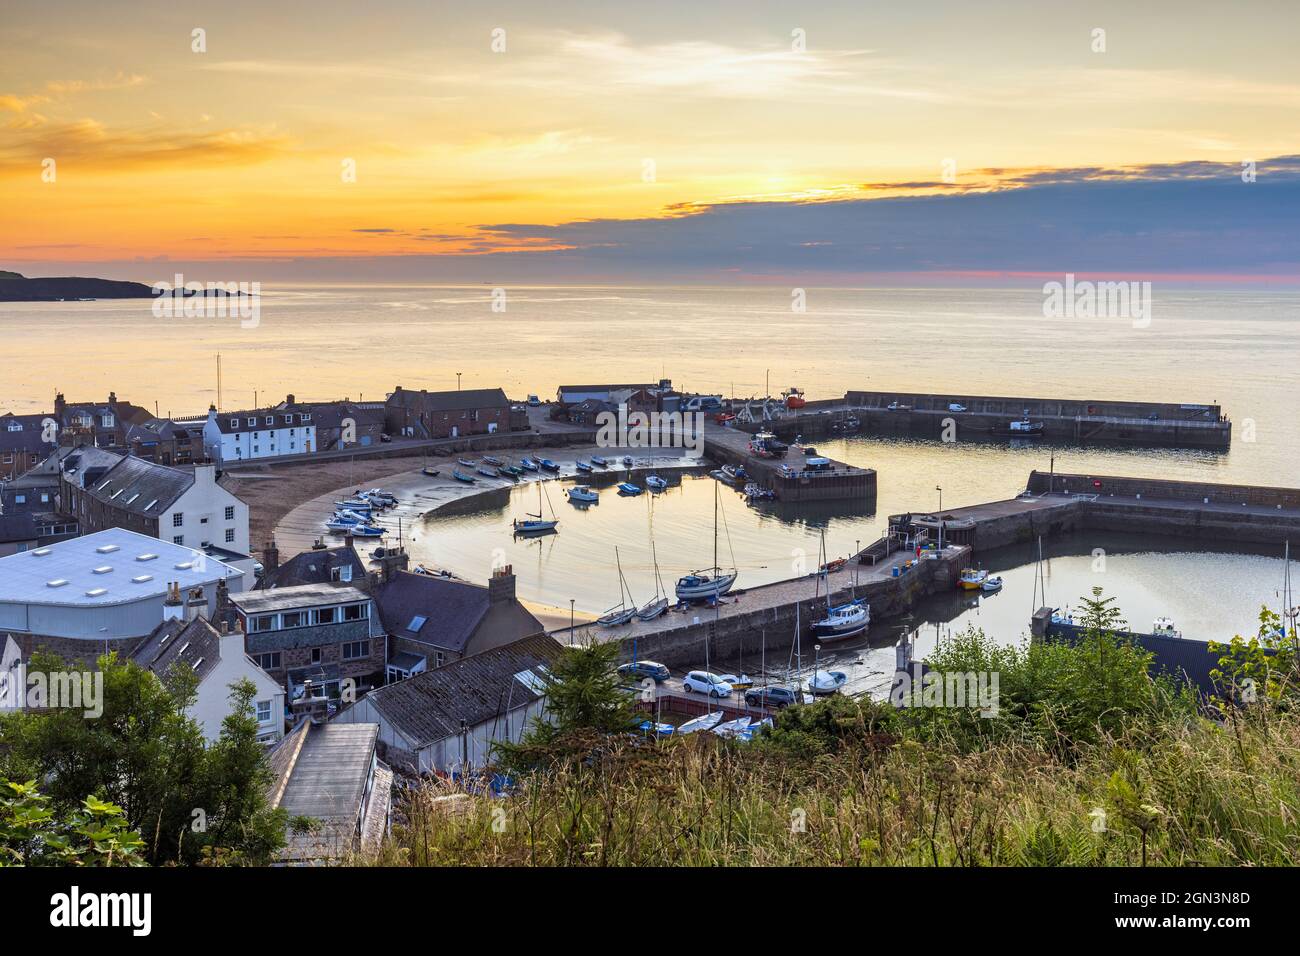 Stonehaven harbour at sunrise. Stonehaven is a harbour town in Aberdeenshire lying to the south of Aberdeen on Scotland's north east coast. Stock Photo